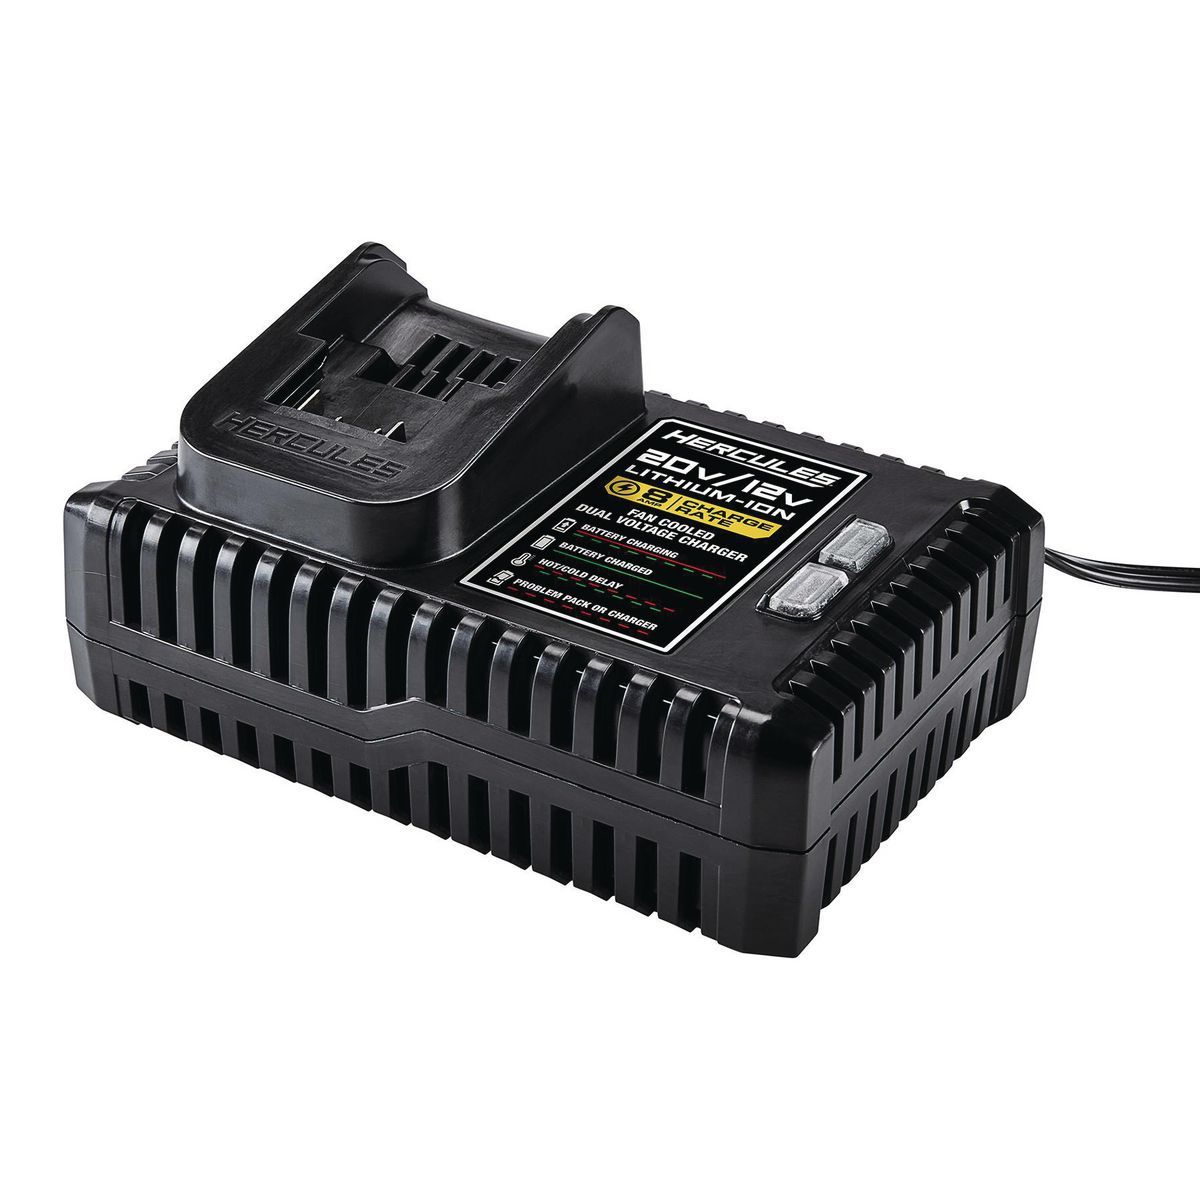 HERCULES 20V/12V Dual Voltage, Fan Cooled Lithium-Ion Battery Charger